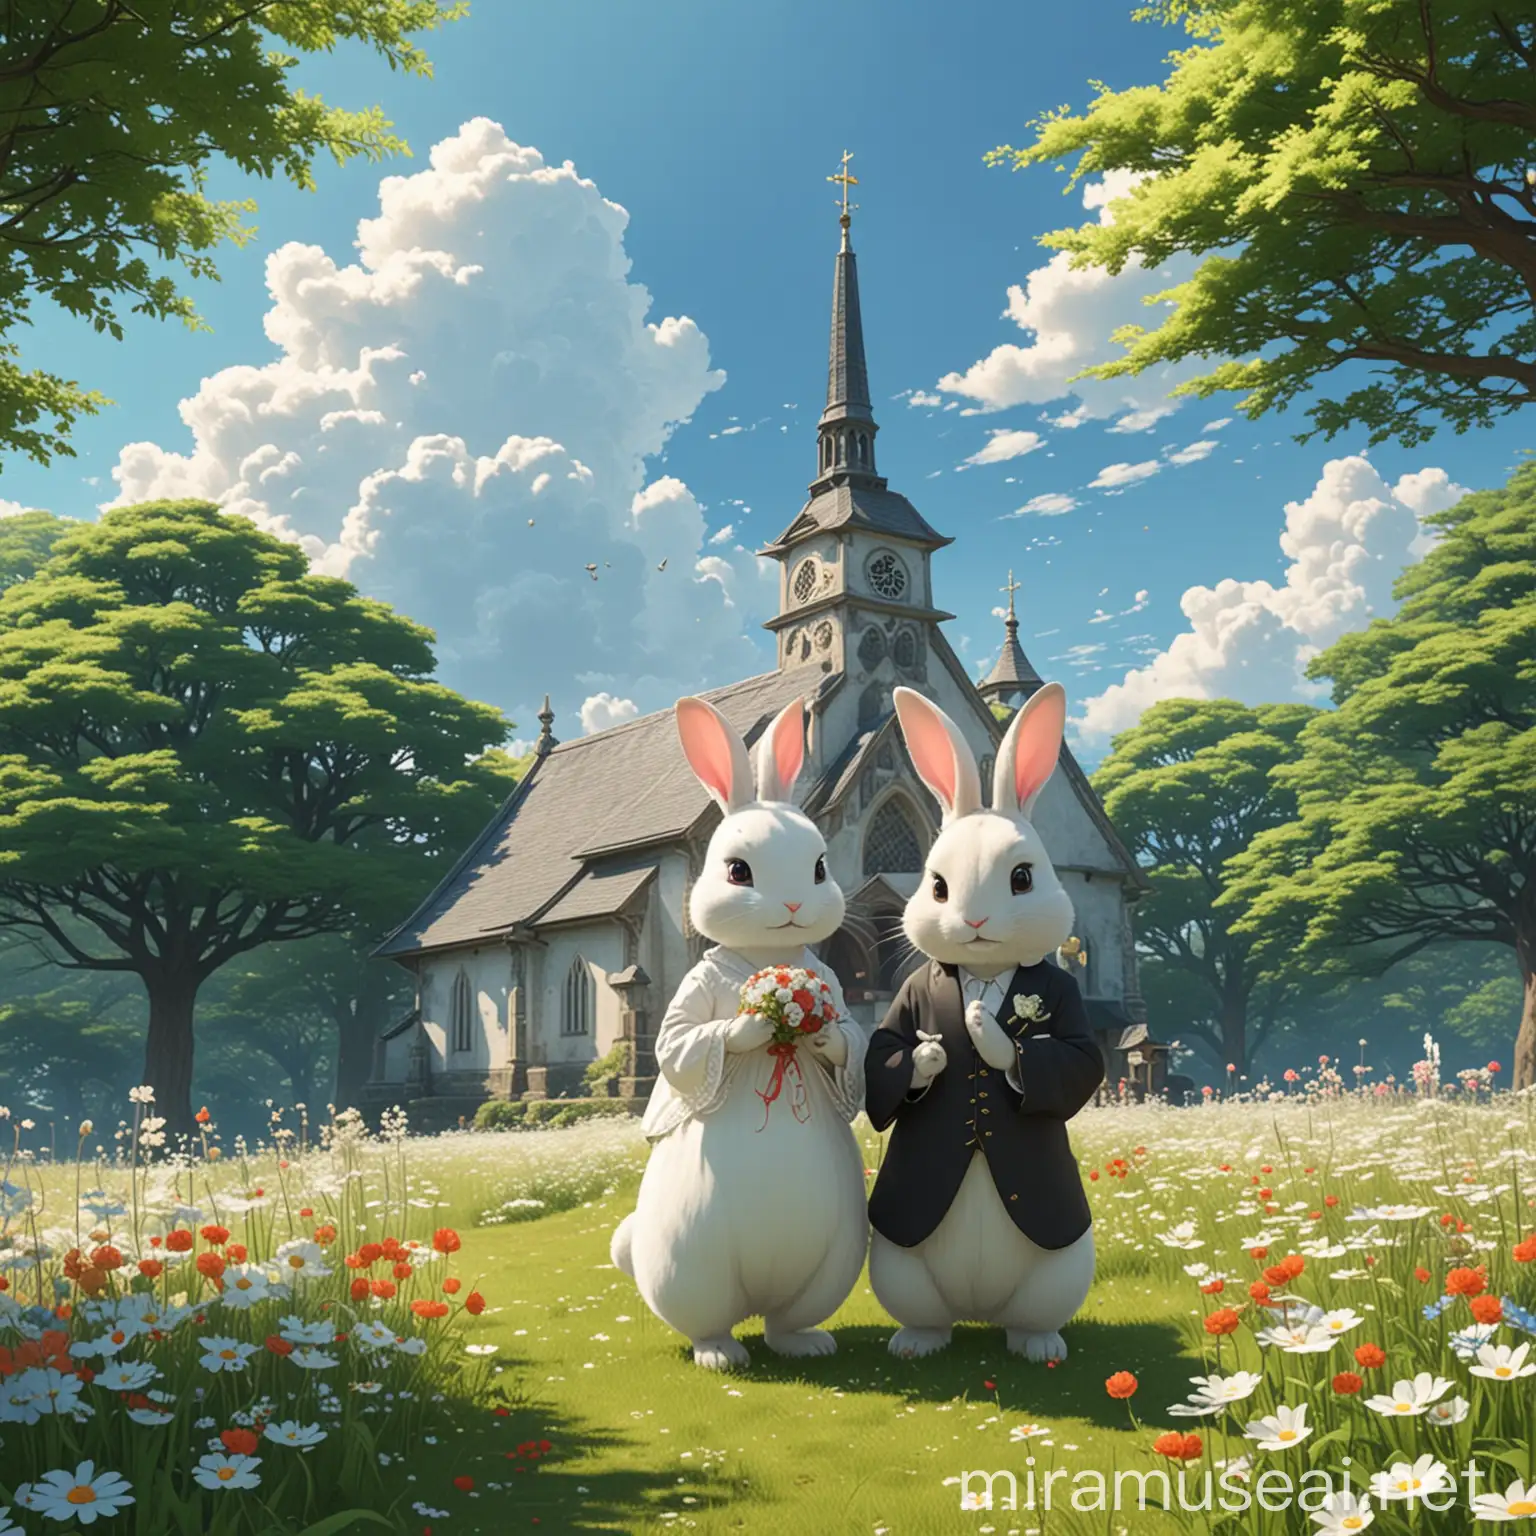 Bunny Wedding Ceremony in Japanese Animated Style Wallpaper